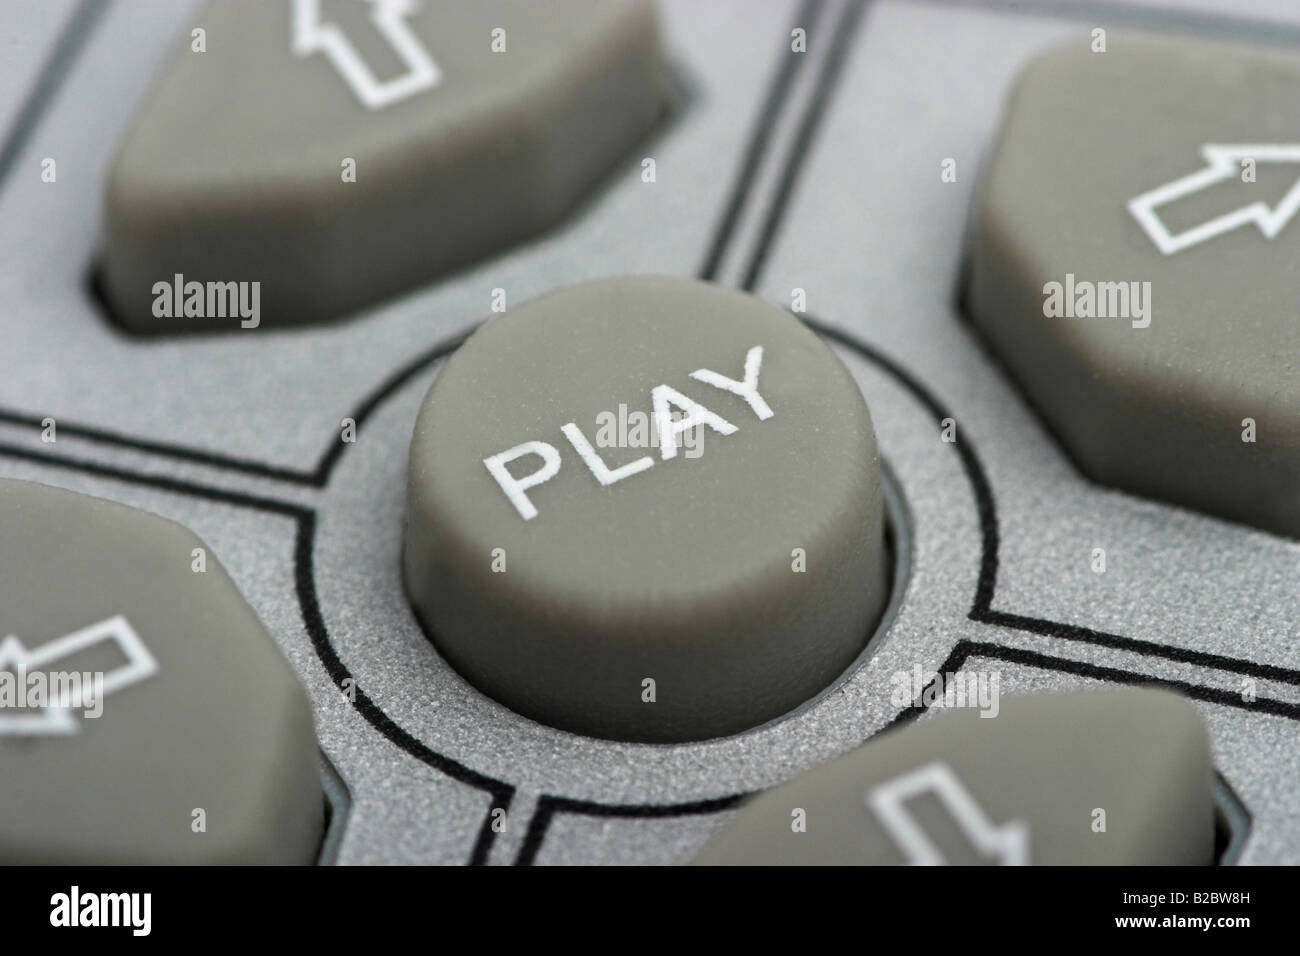 Play button on remote control Stock Photo